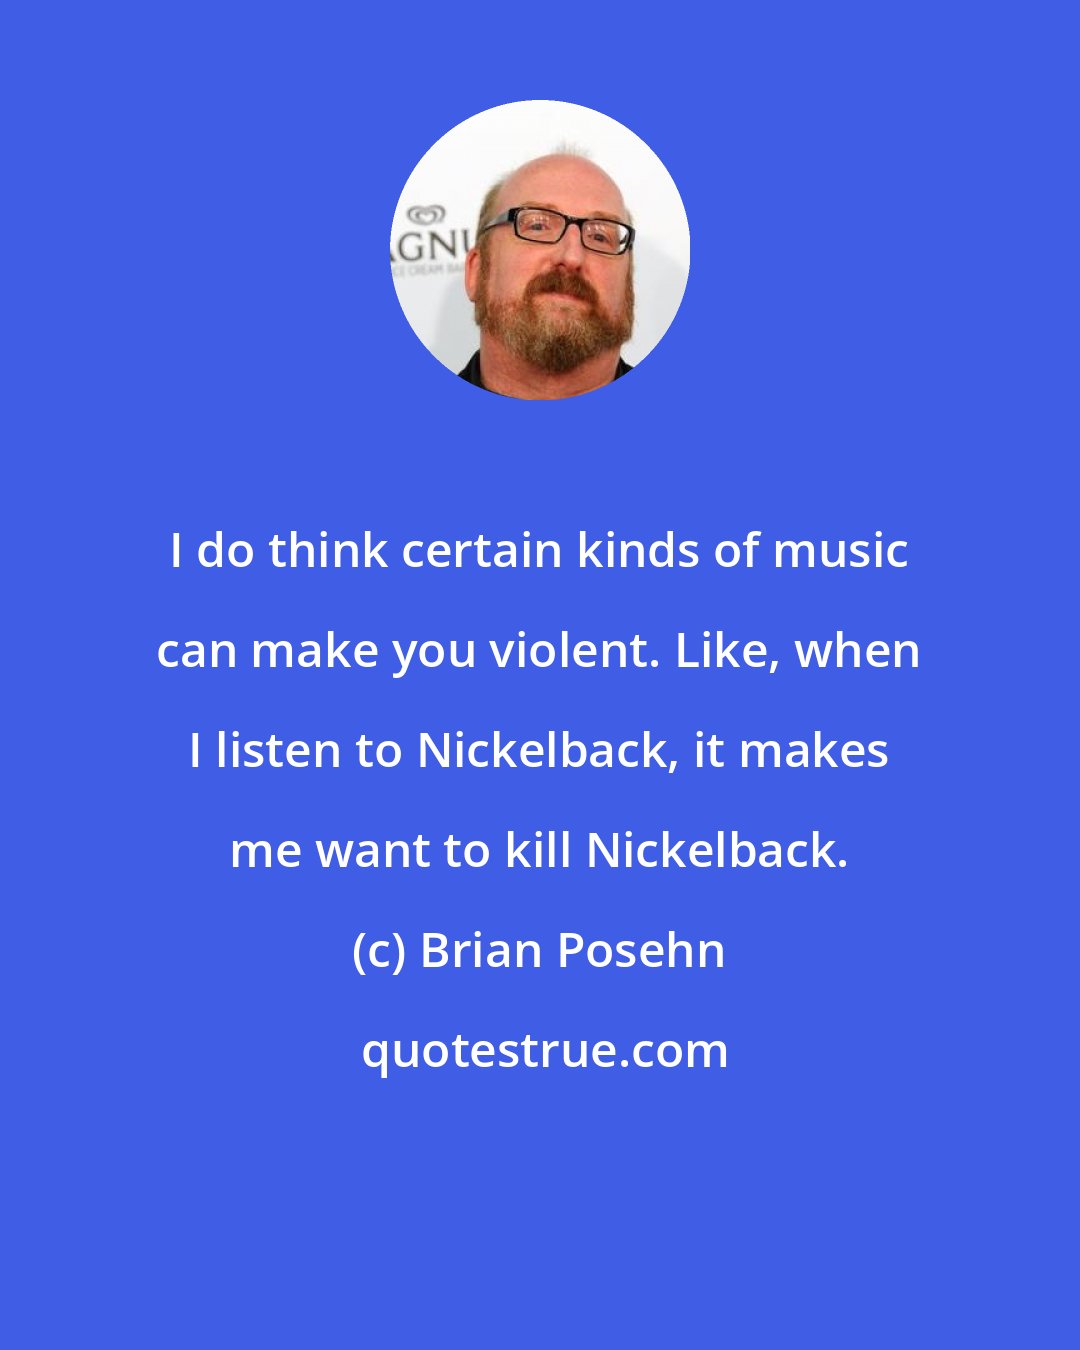 Brian Posehn: I do think certain kinds of music can make you violent. Like, when I listen to Nickelback, it makes me want to kill Nickelback.